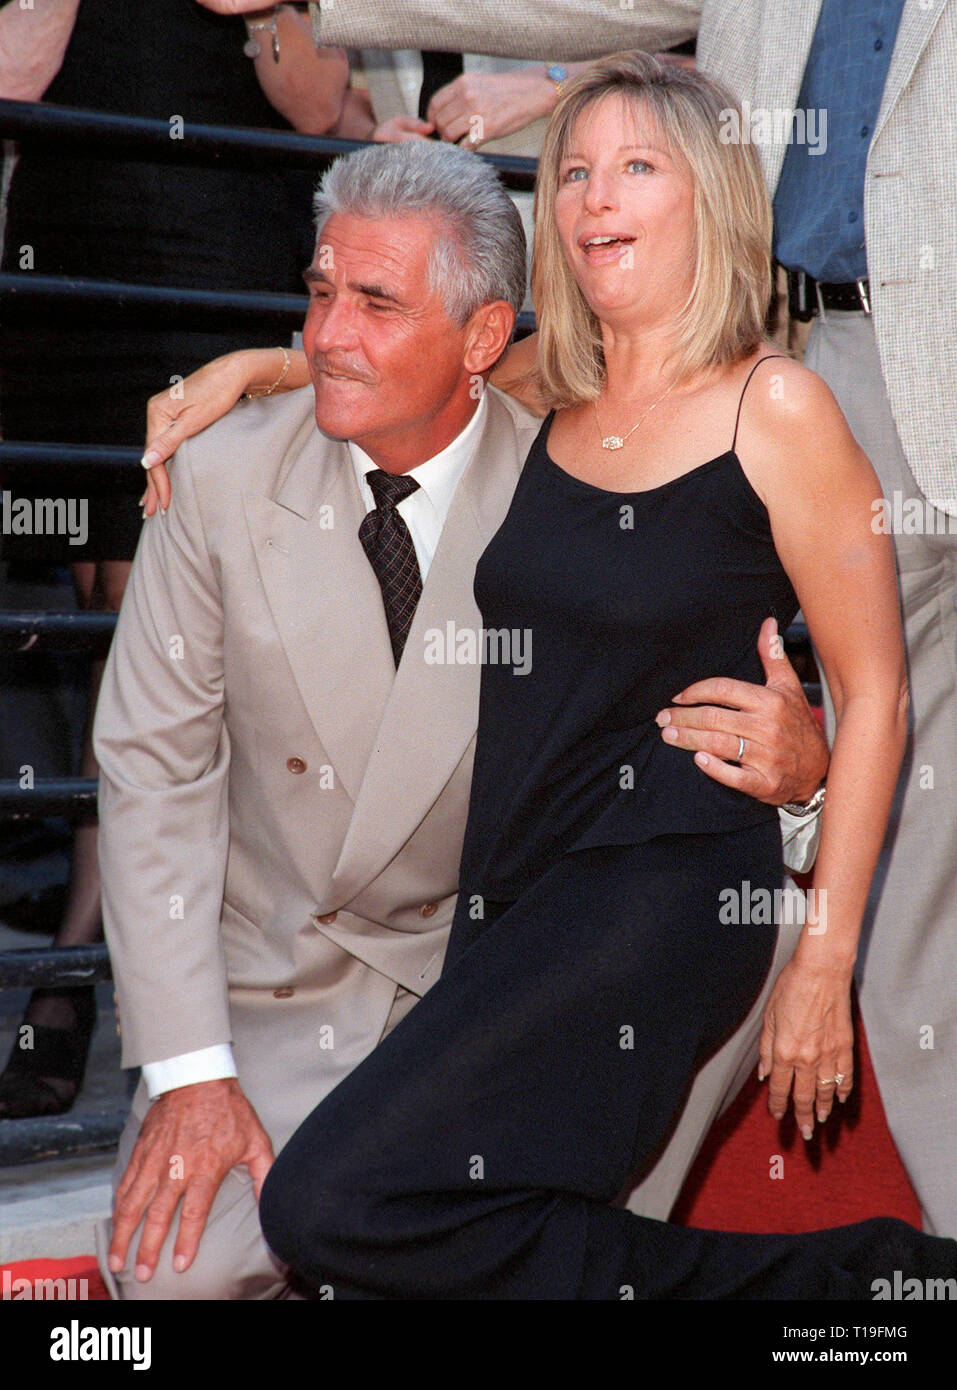 LOS ANGELES, CA - August 27, 1998: Actor JAMES BROLIN with actress/director wife BARBRA STREISAND in Hollywood where he was honored with the 2115th star on the Hollywood Walk of Fame. Stock Photo